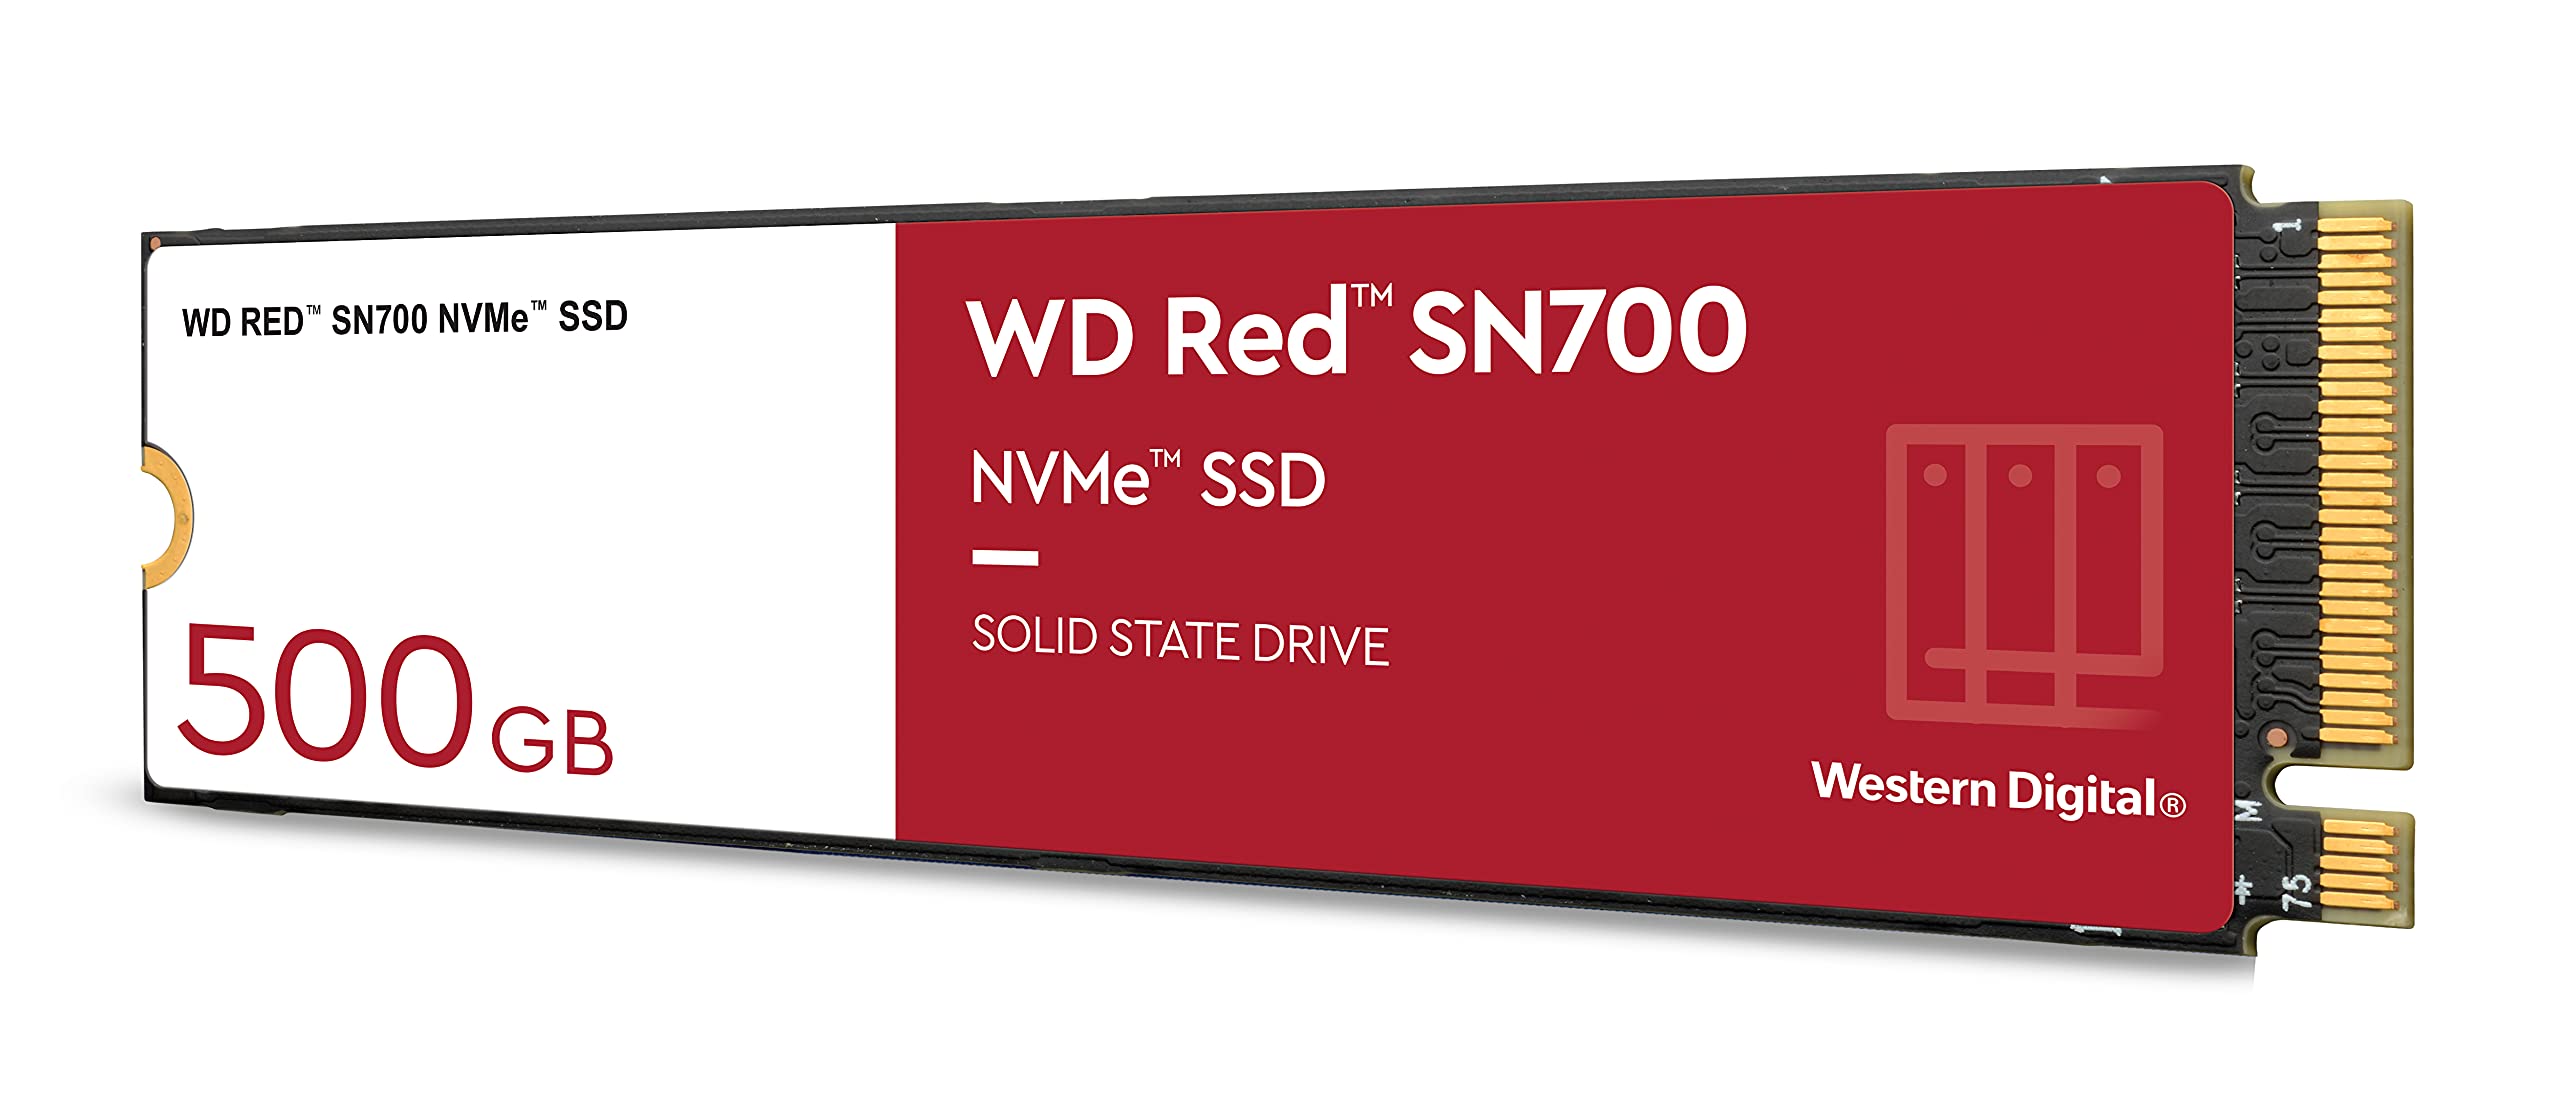 Western Digital 500GB WD Red SN700 NVMe Internal Solid State Drive SSD for NAS Devices - Gen3 PCIe, M.2 2280, Up to 3,430 MB/s - WDS500G1R0C